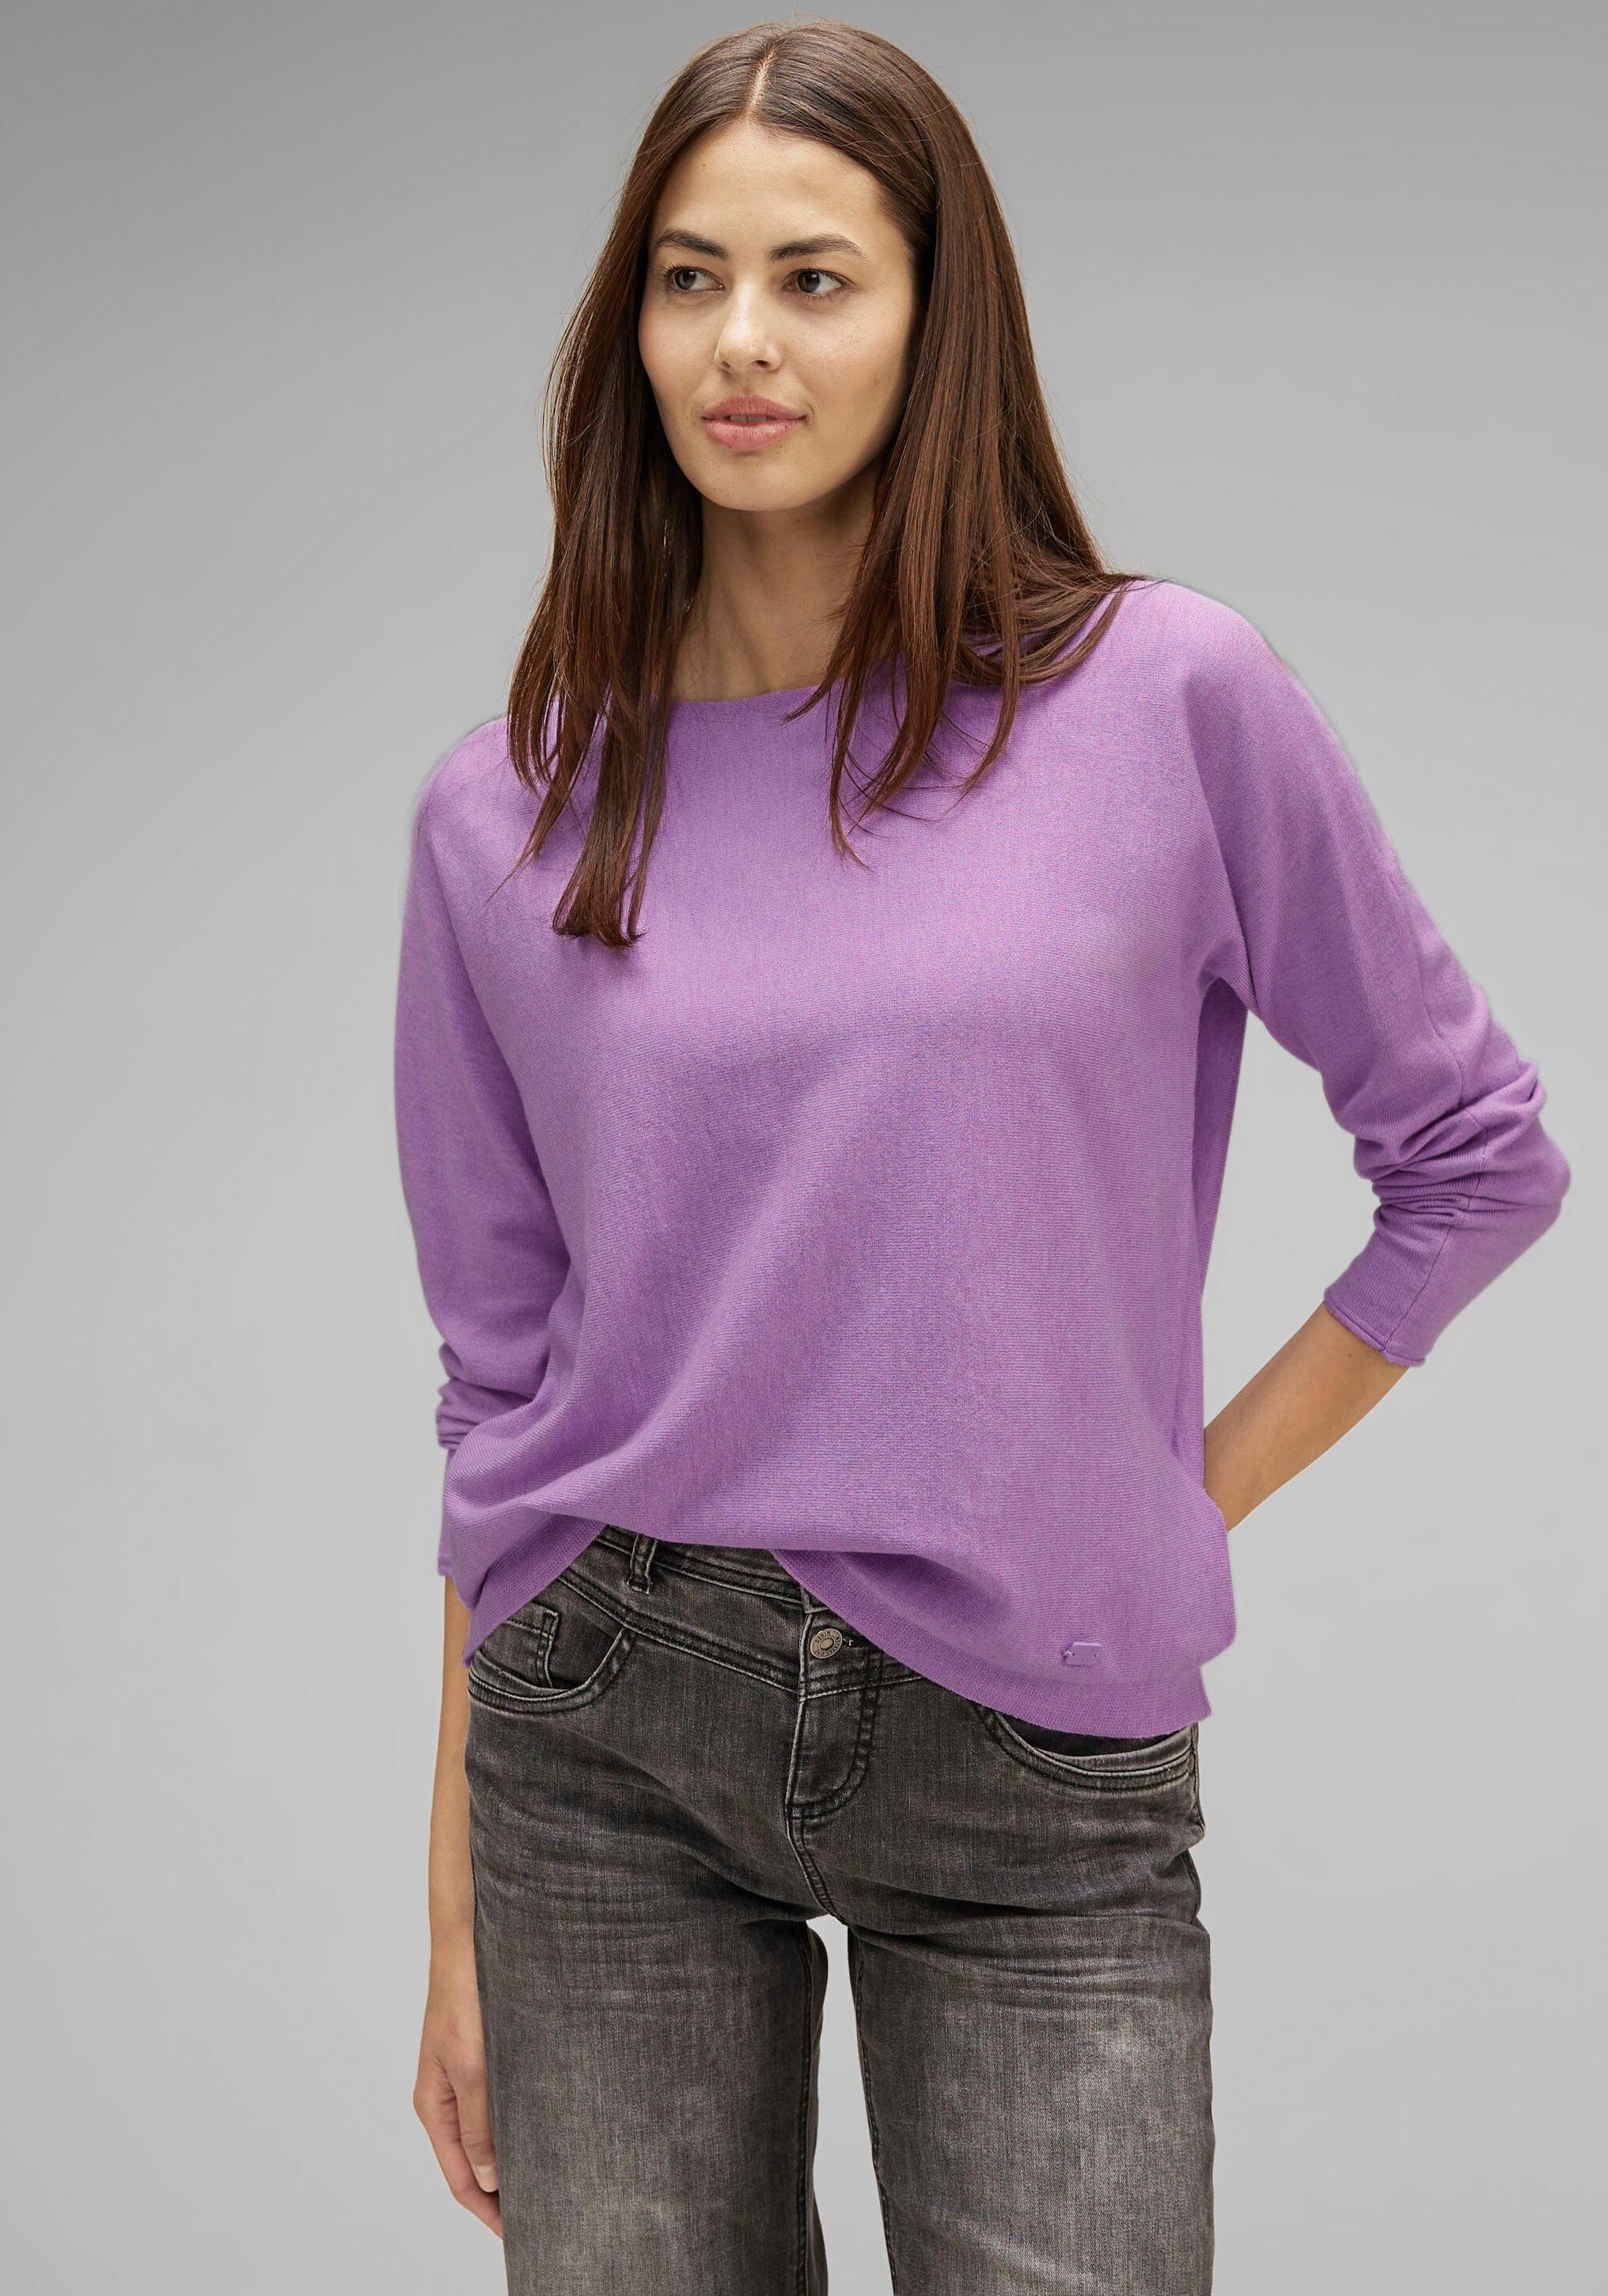 STREET ONE in Strickpullover Unifarbe lilac pure